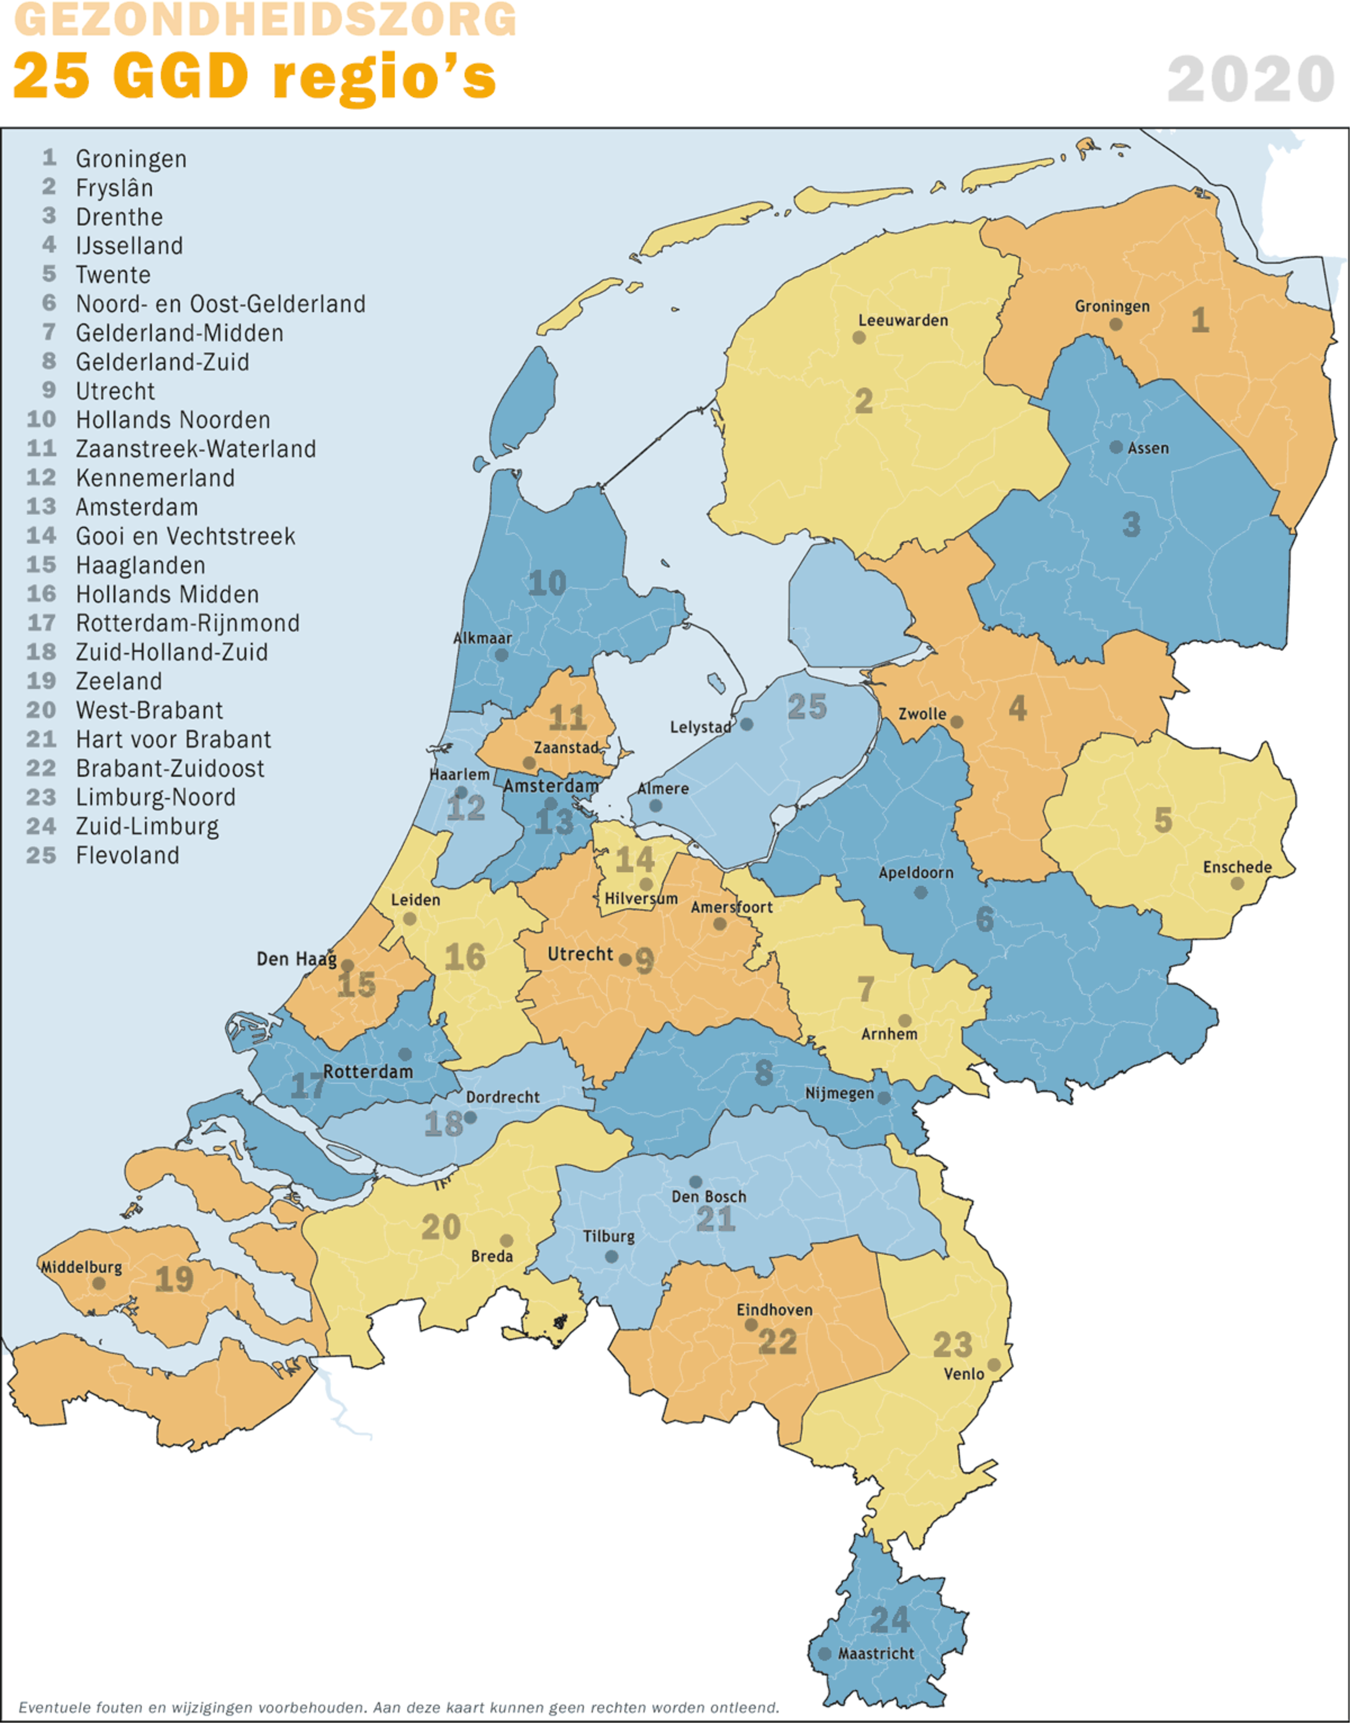 The Dutch see Red: (in)formal science advisory bodies during the COVID-19  pandemic | Humanities and Social Sciences Communications